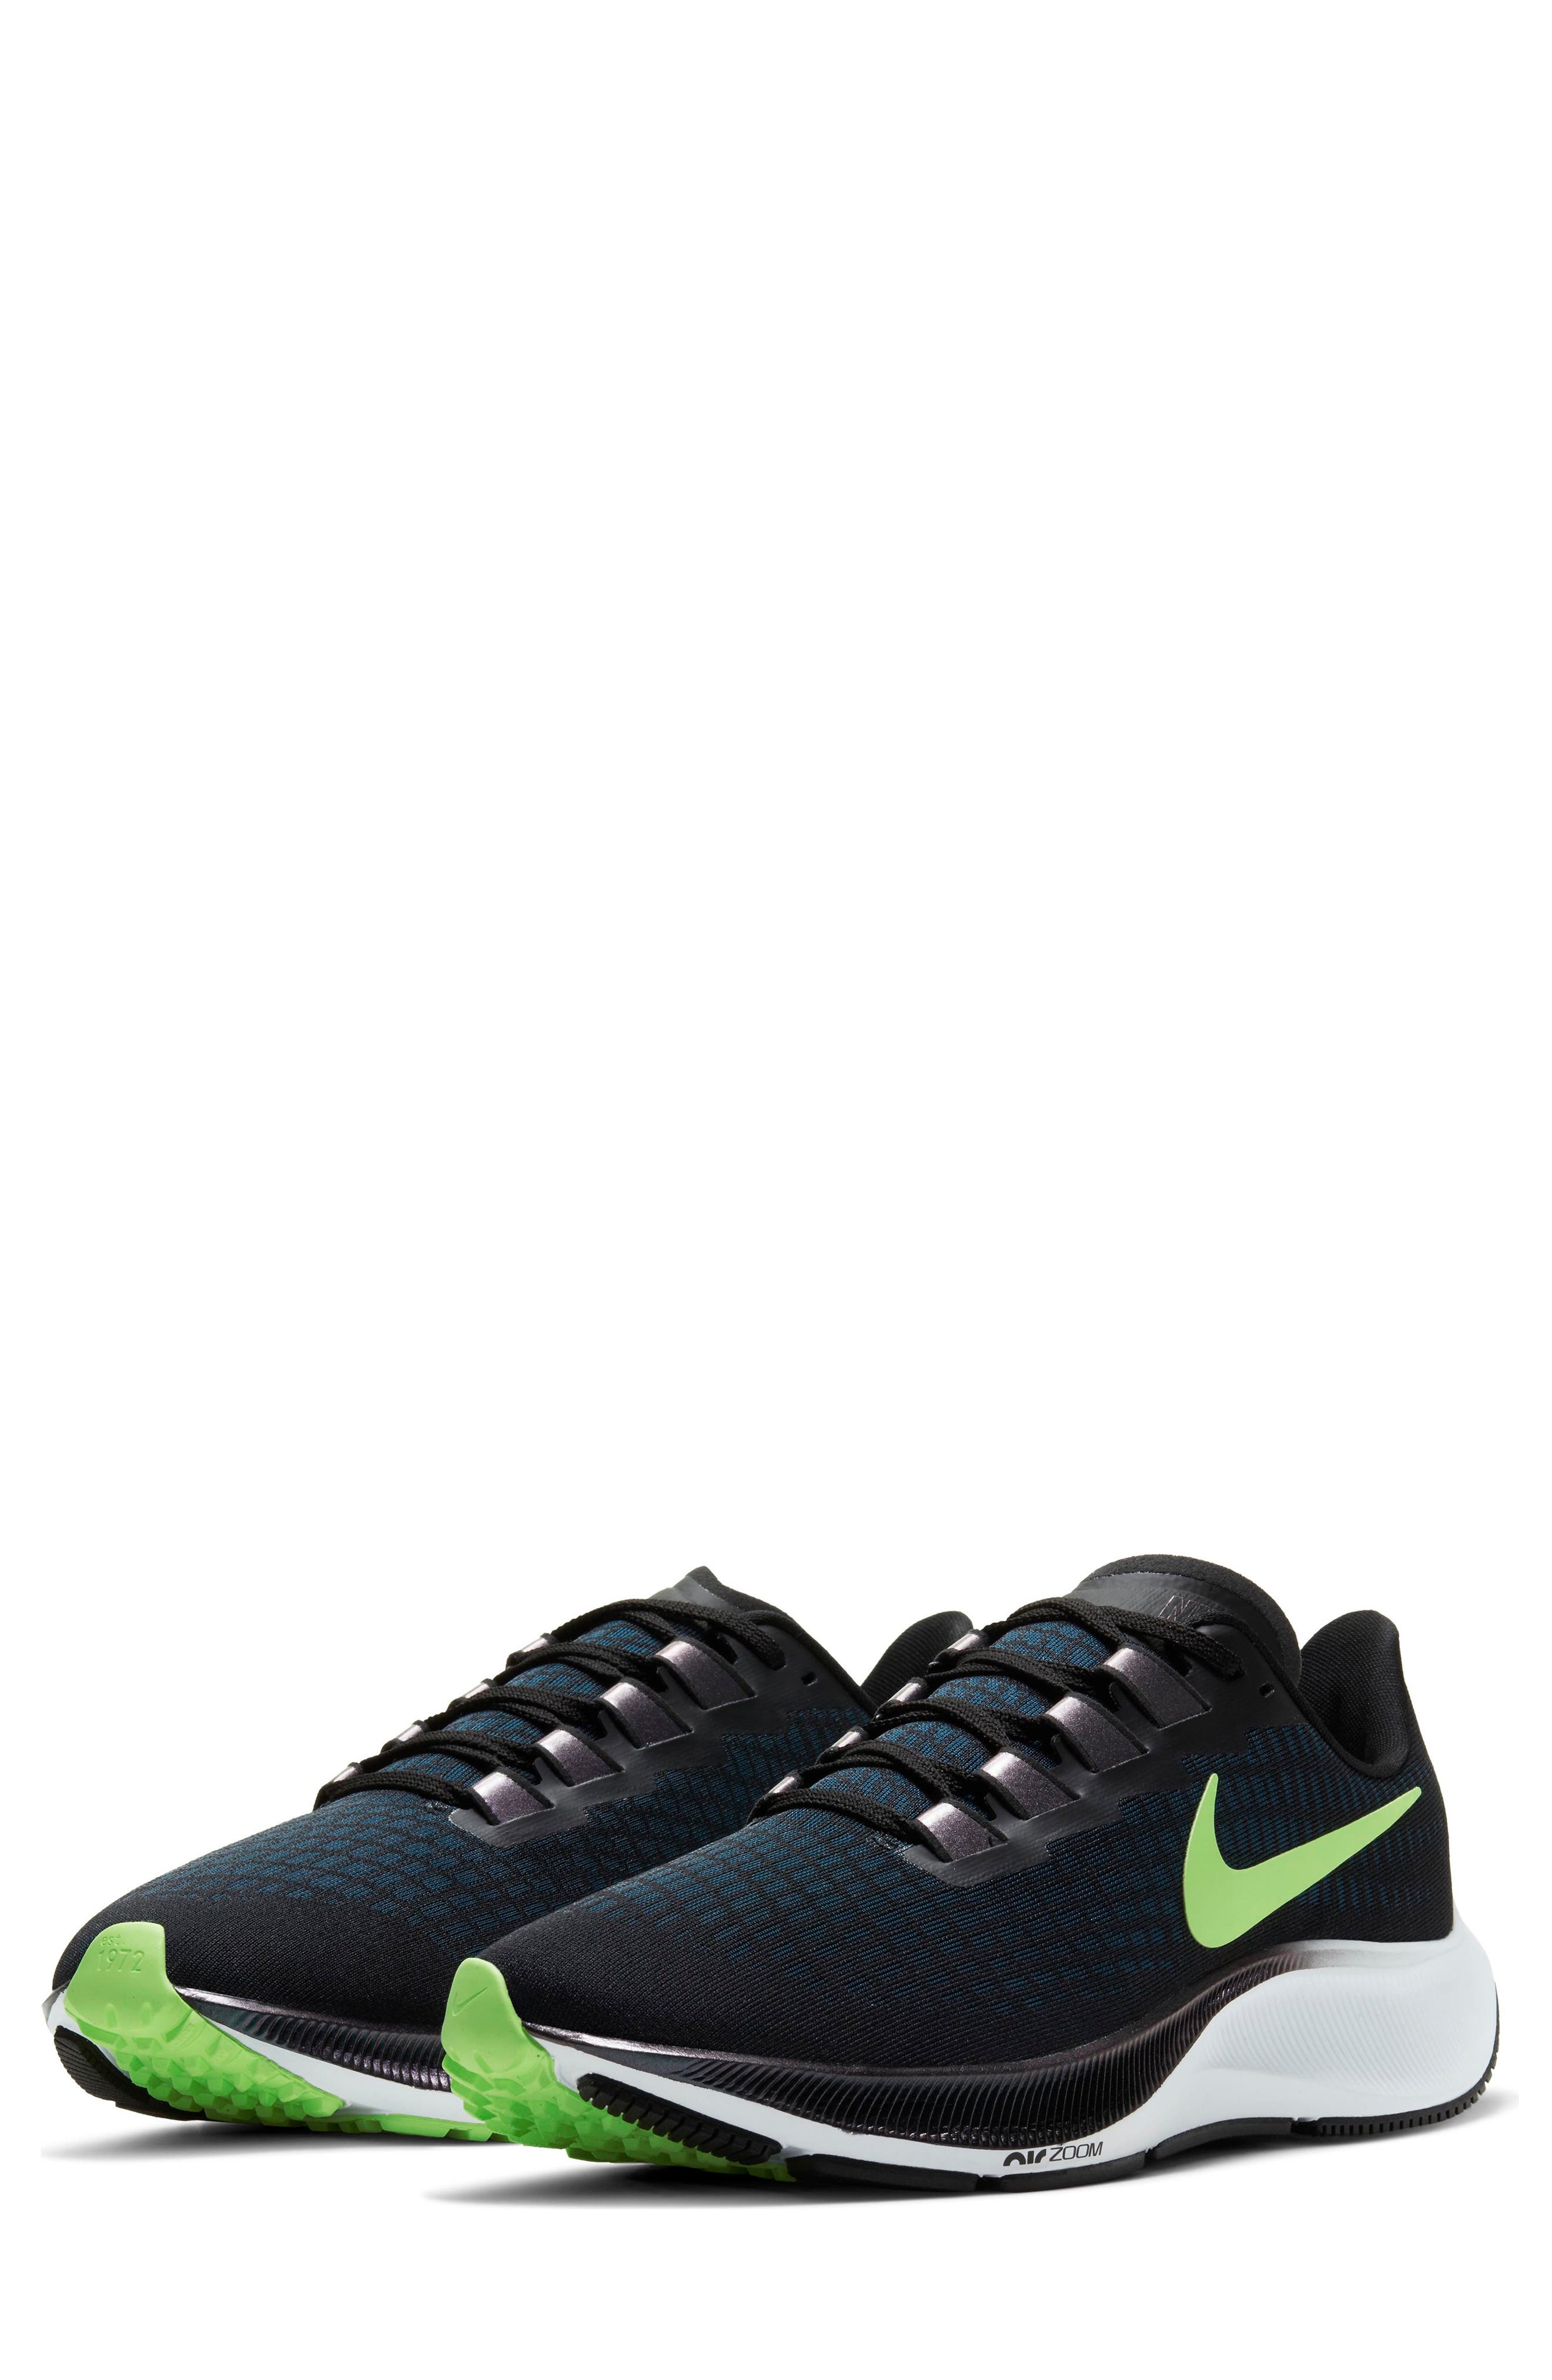 nike green and blue shoes